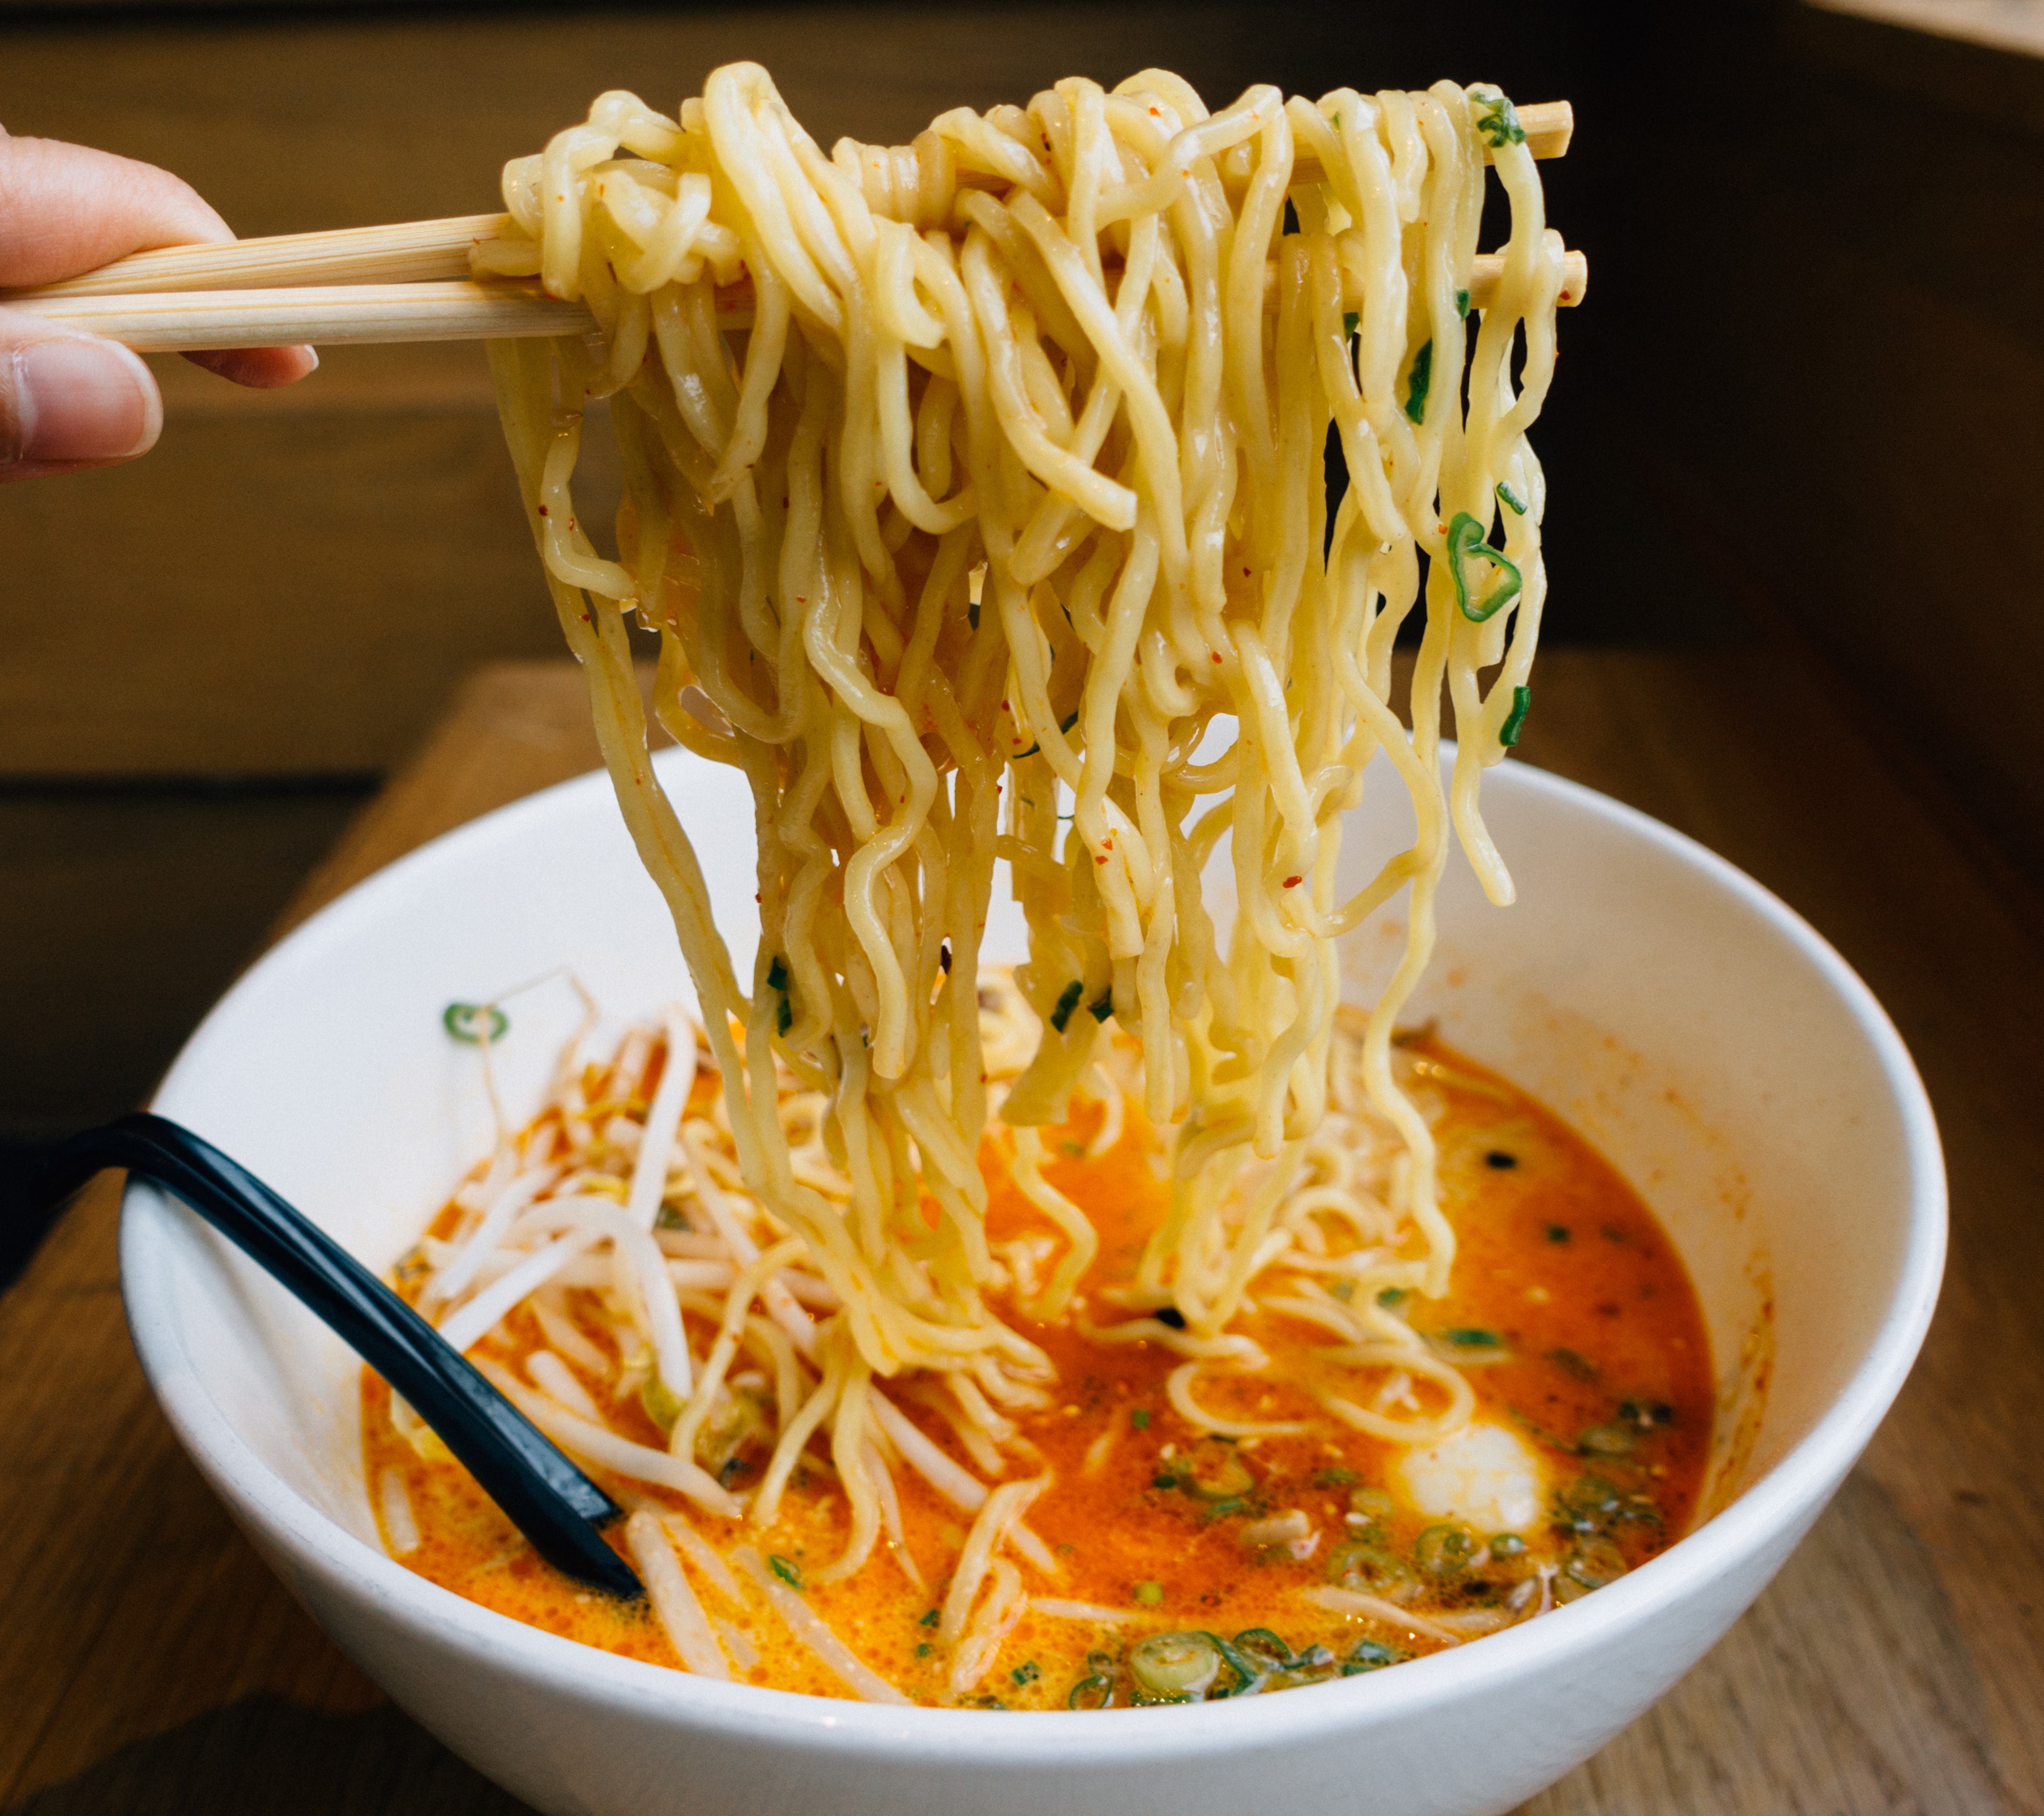 Chopsticks full of ramen noodles in a bowl of spicy soup.